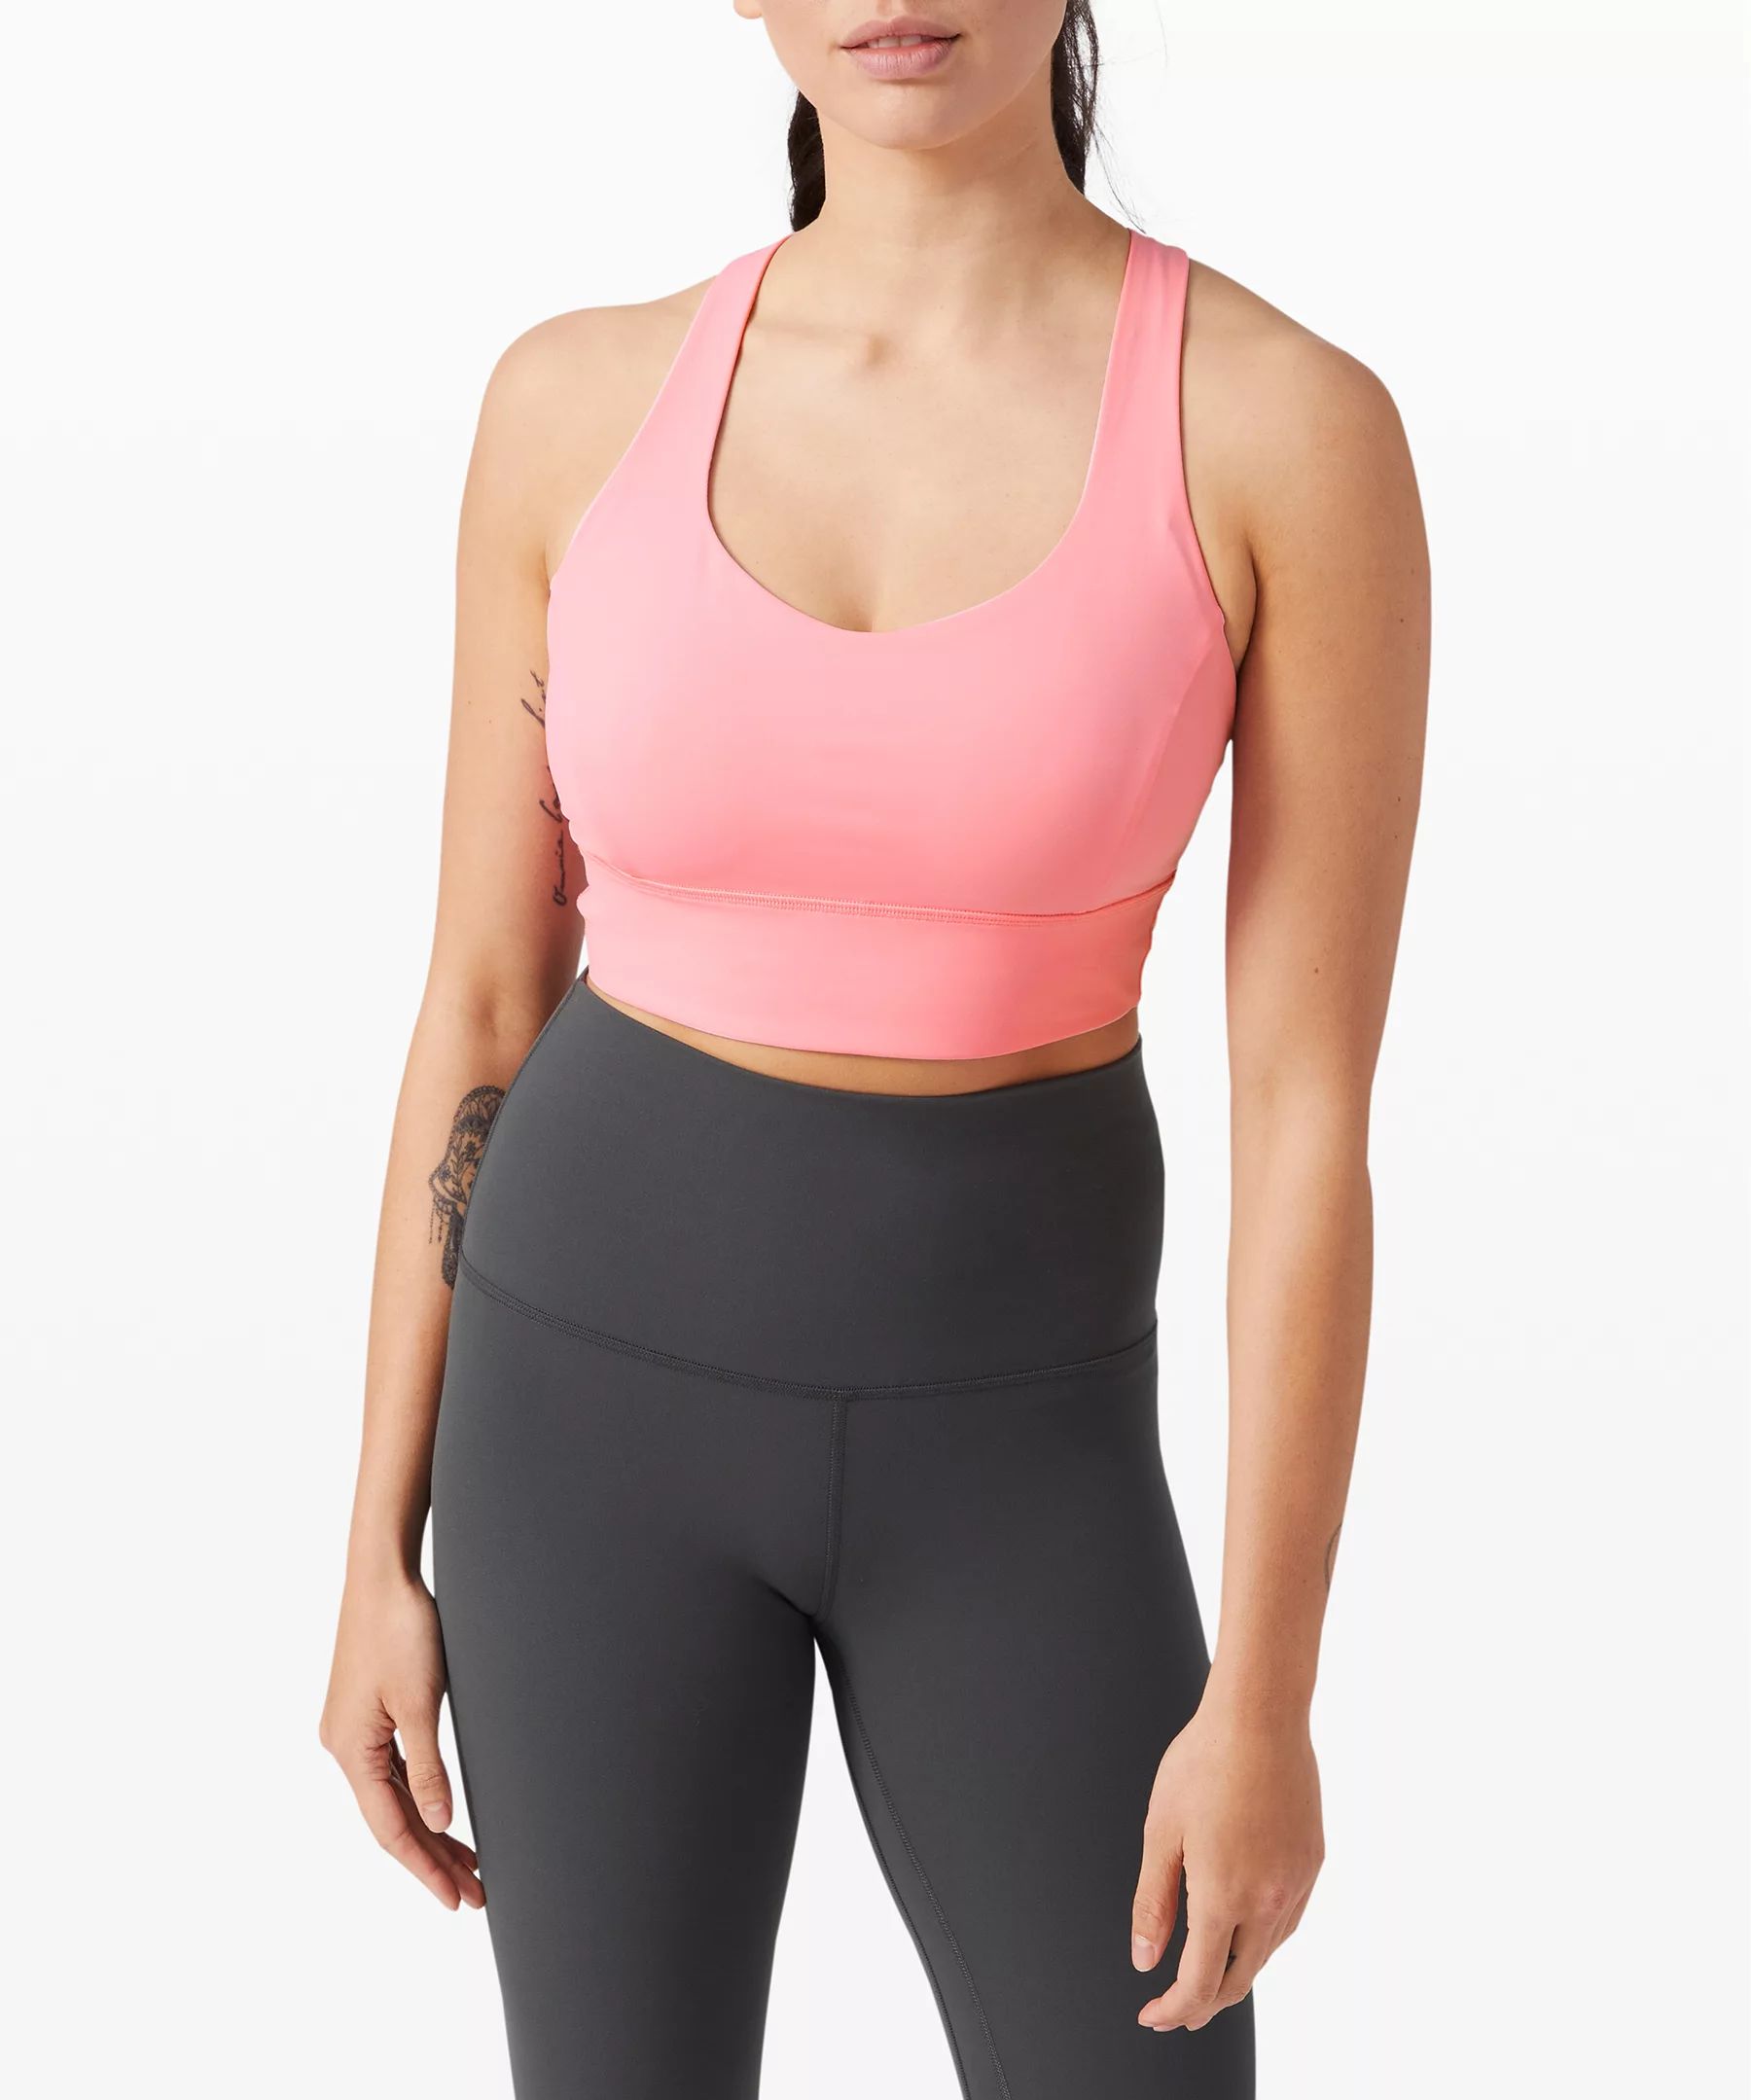 Free To Be Serene Bra Long LineLight Support, C/D Cup (Online Only) | Lululemon (US)